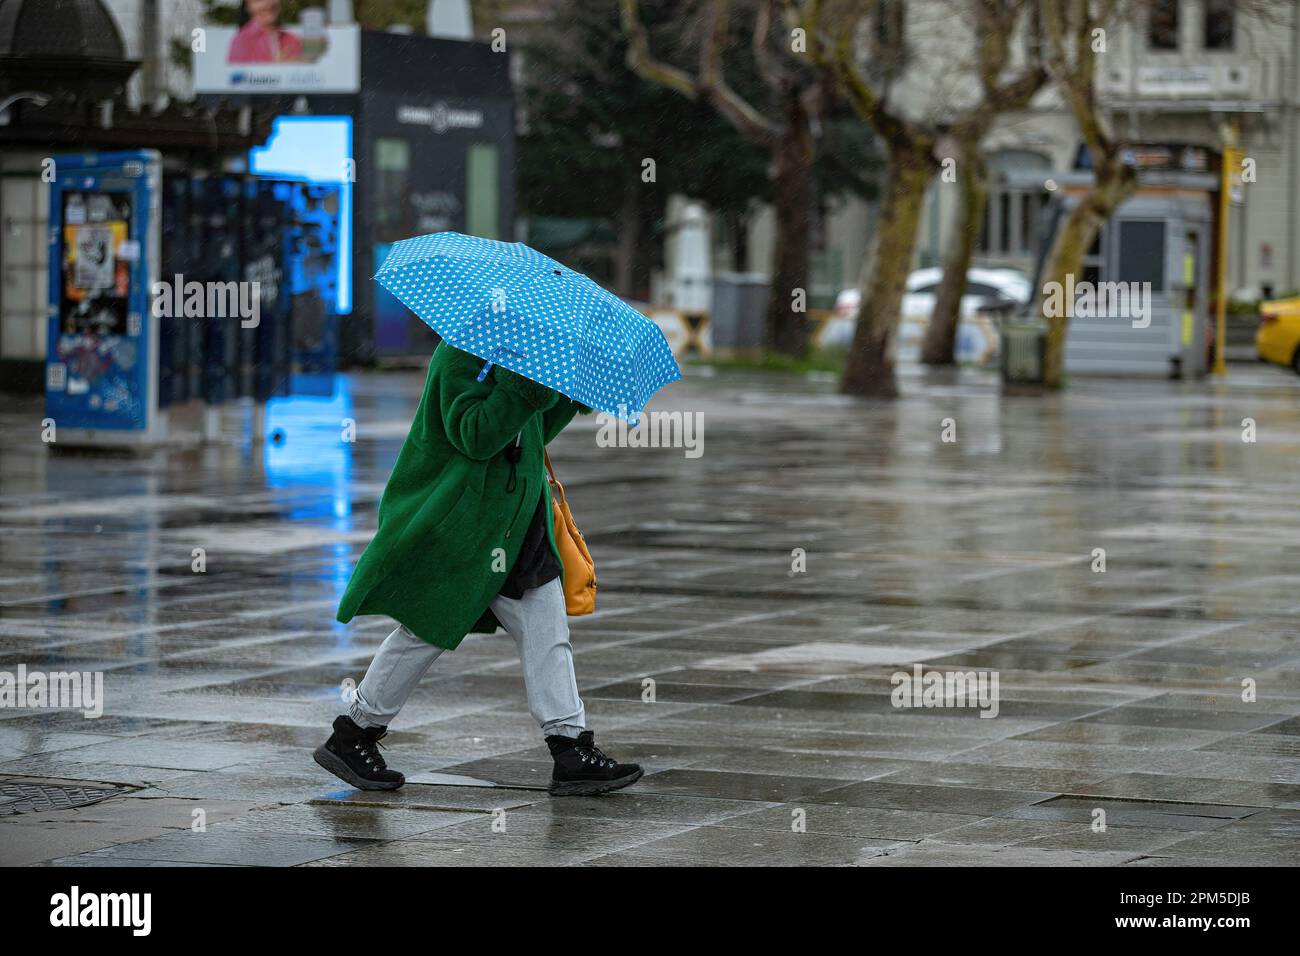 A woman holds an umbrella to protect herself from the heavy rainfall. Heavy rain in Istanbul negatively affected life in Kadikoy. People were seen walking with umbrellas to protect themselves from the rain. Stock Photo